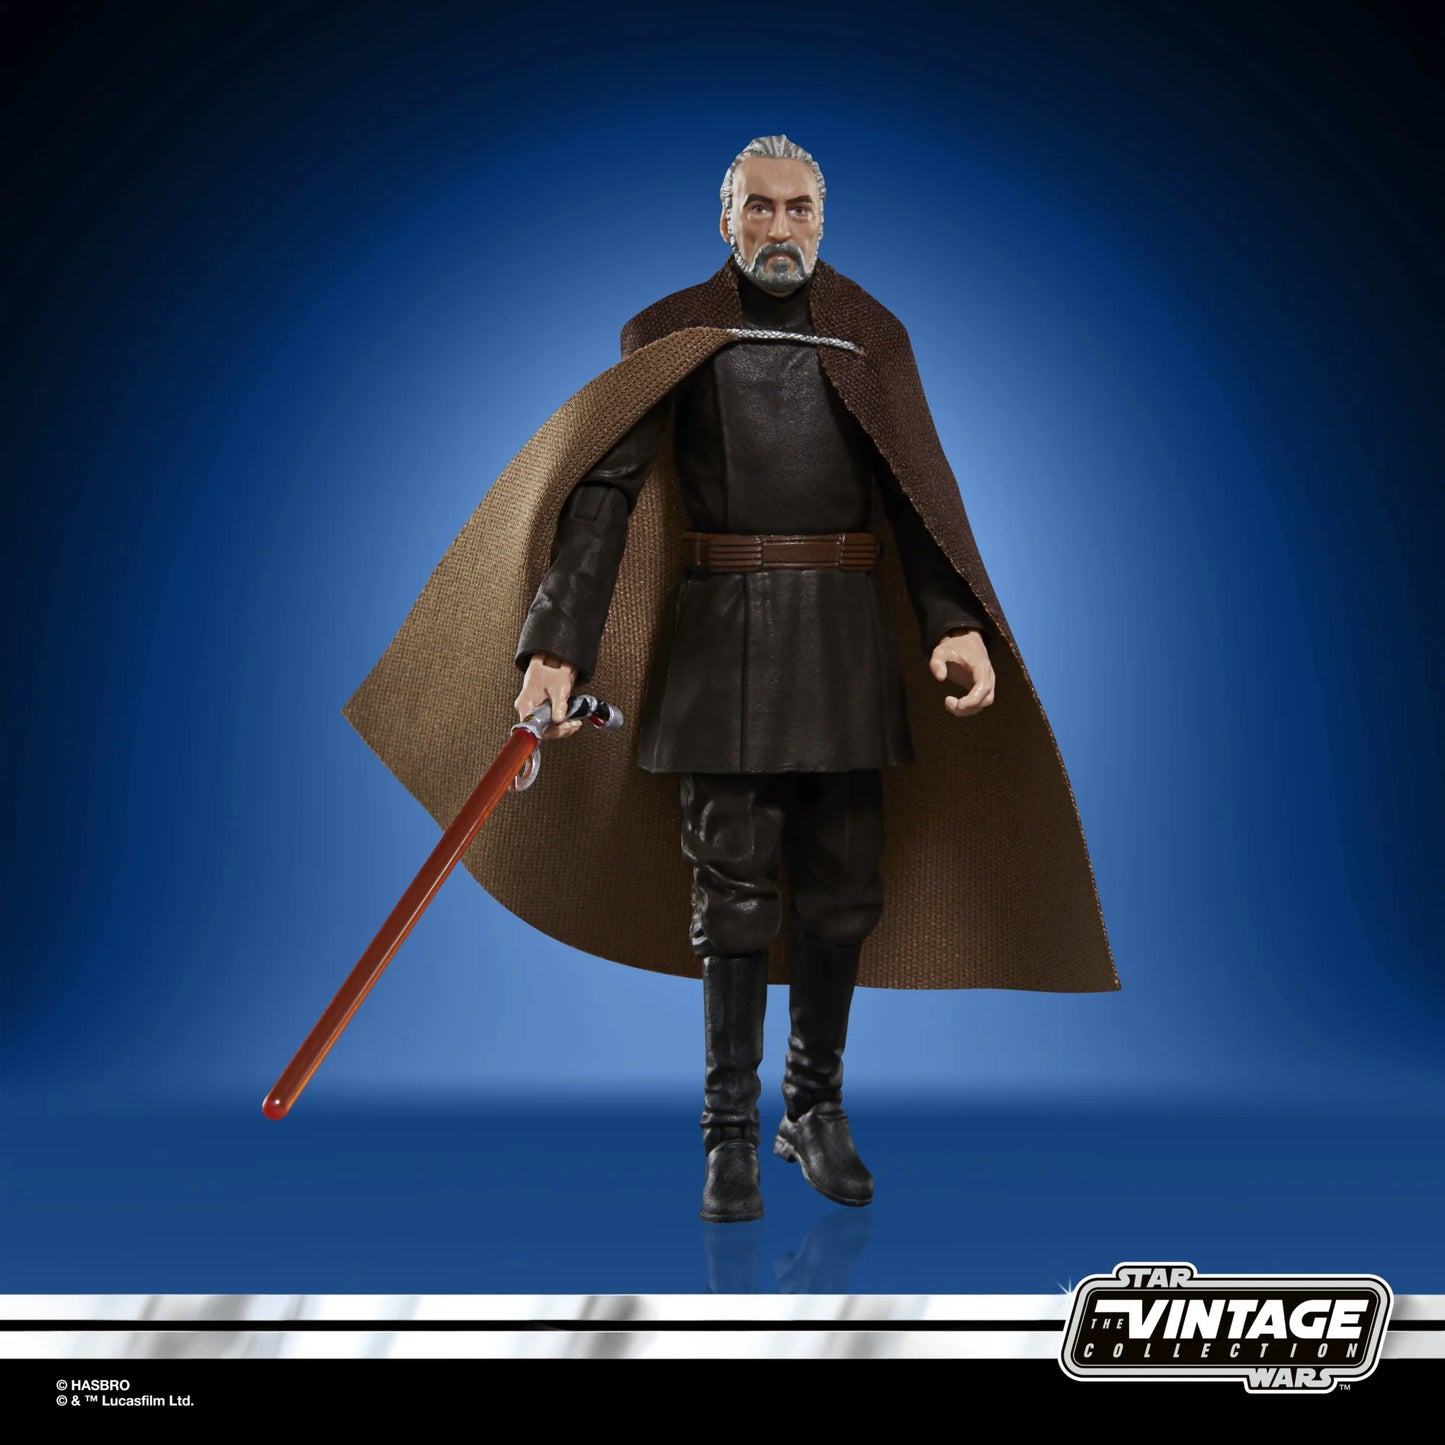 Star Wars The Vintage Collection Count Dooku 3.75" Action Figure